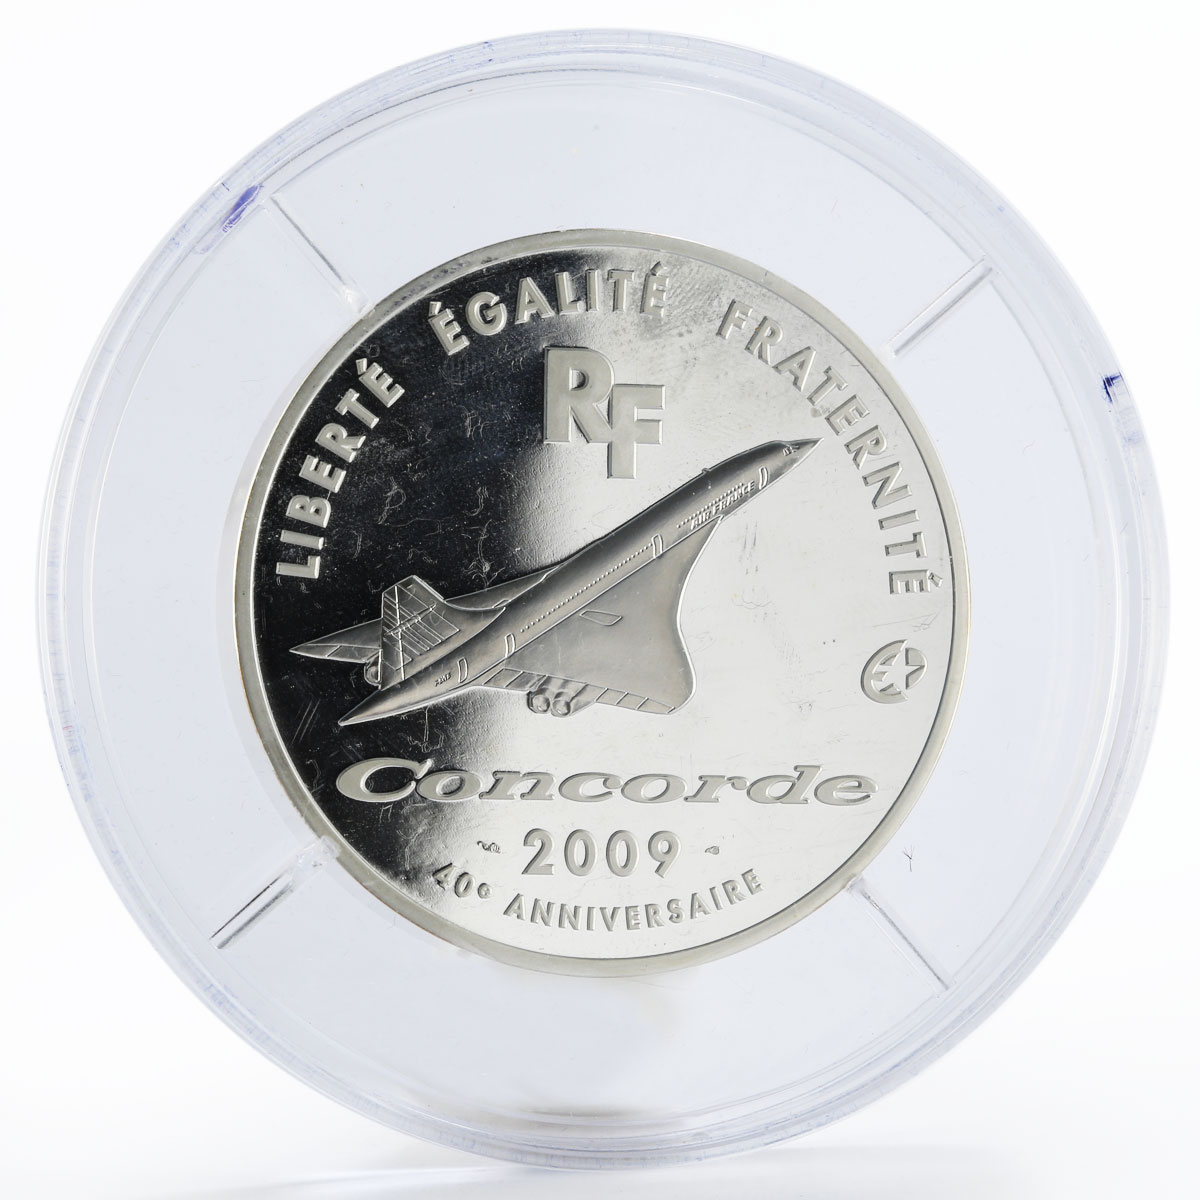 France 50 euro 40th Anniversary of Concorde silver proof coin 2009